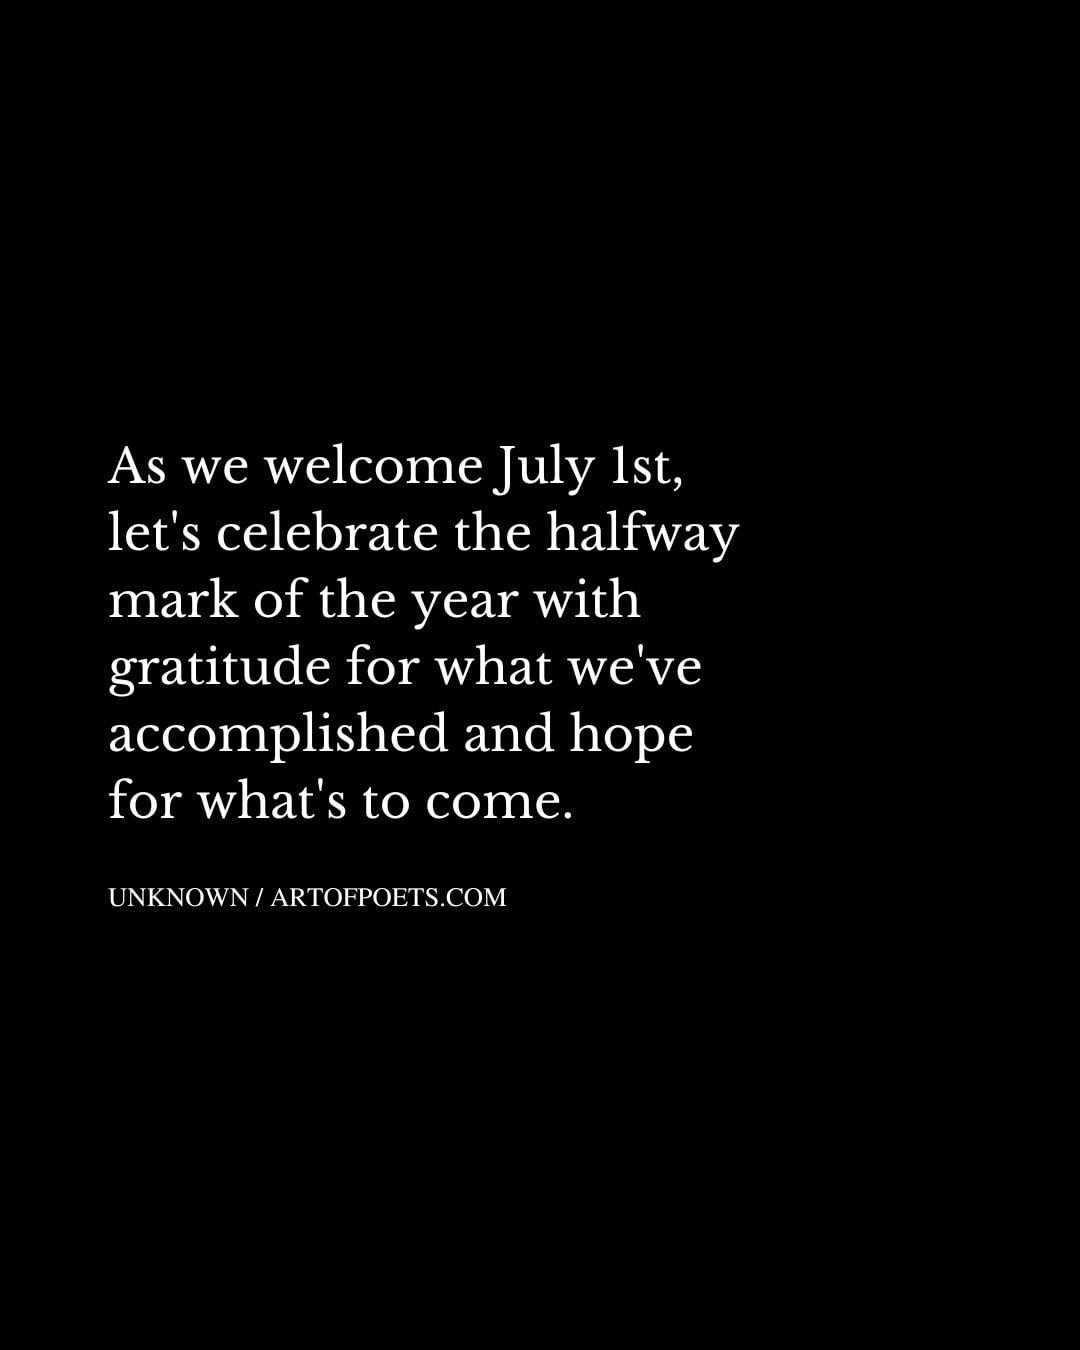 As we welcome July 1st lets celebrate the halfway mark of the year with gratitude